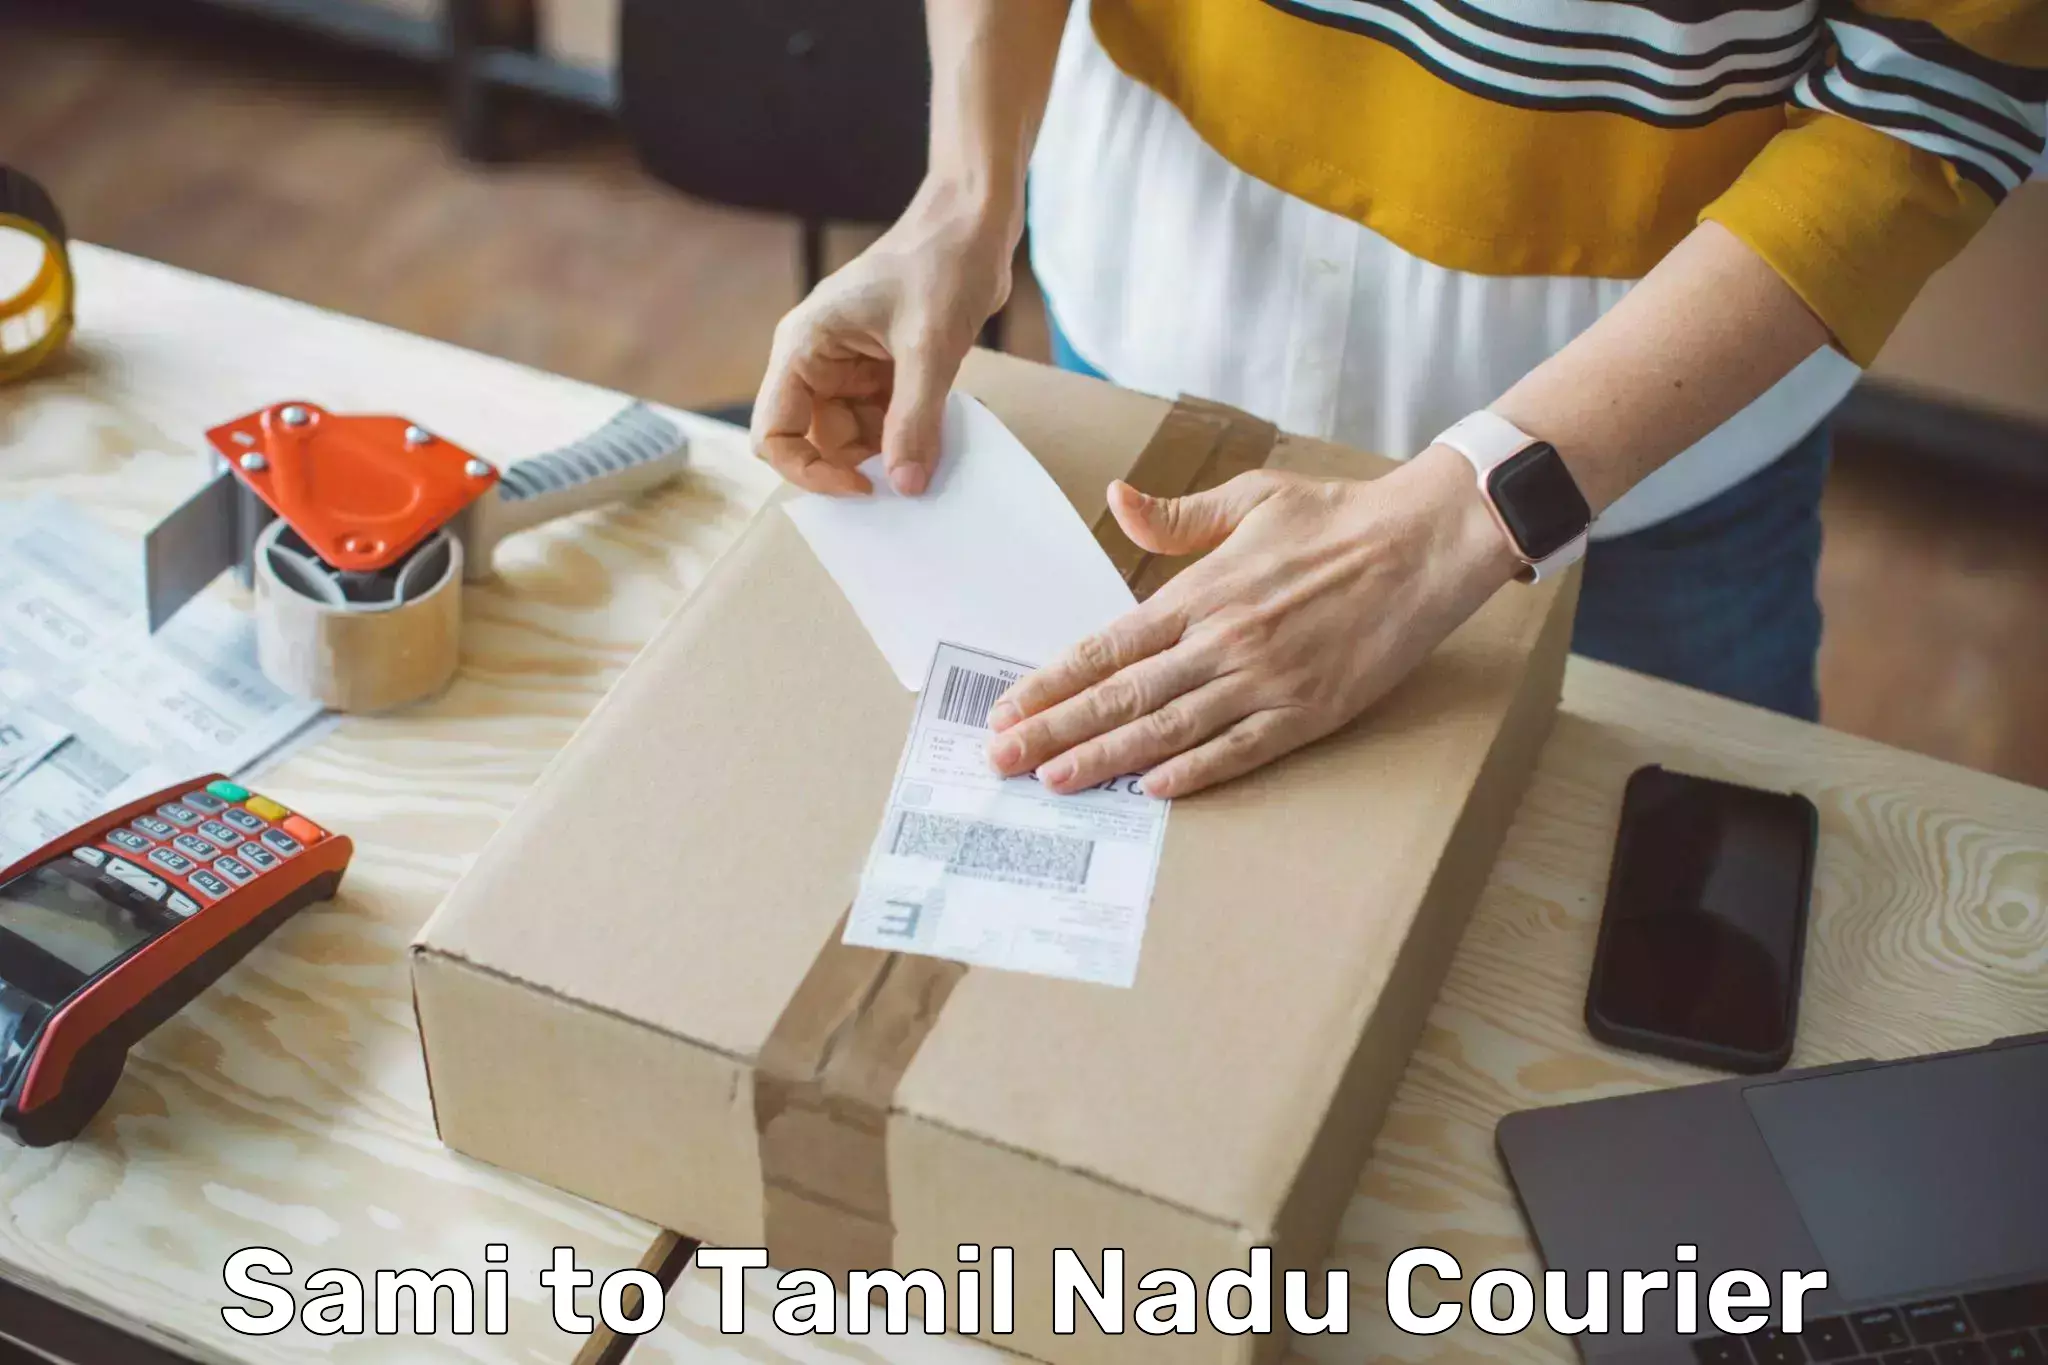 Personalized courier experiences Sami to Tamil Nadu